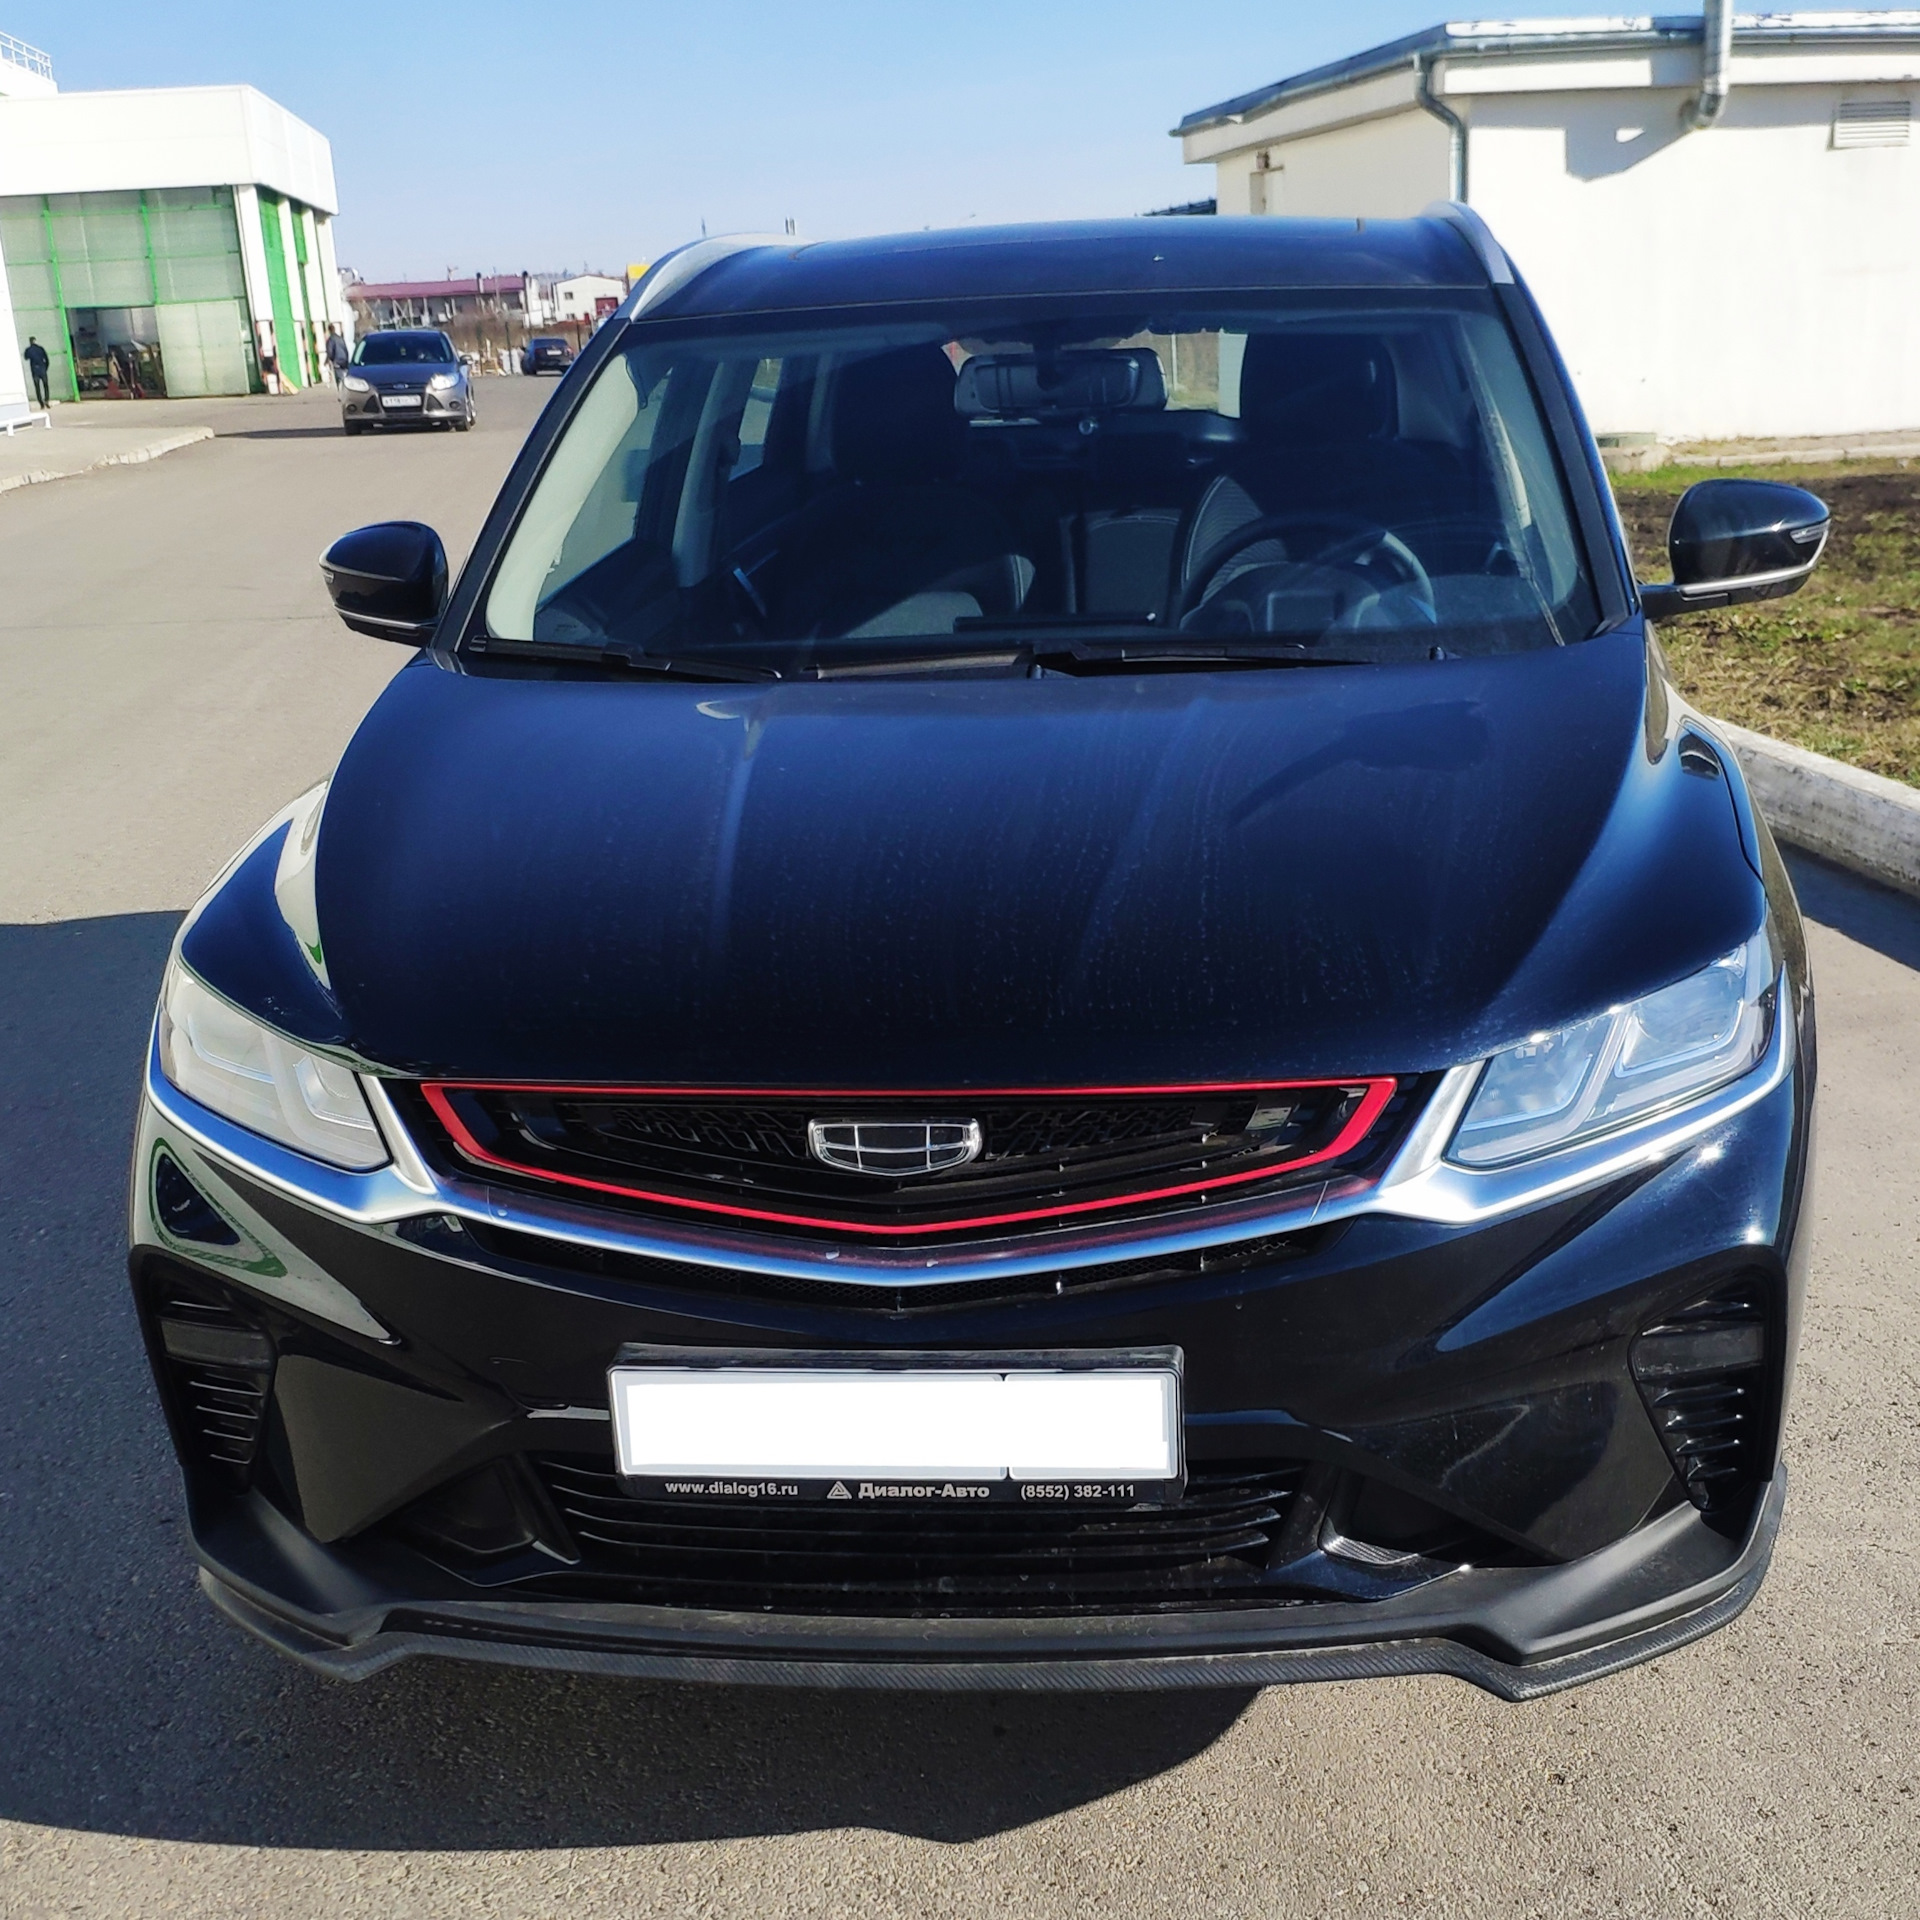 Geely coolray капот. Geely Coolray. Geely Coolray 1.5. Geely Coolray синий. Geely Coolray 2022.